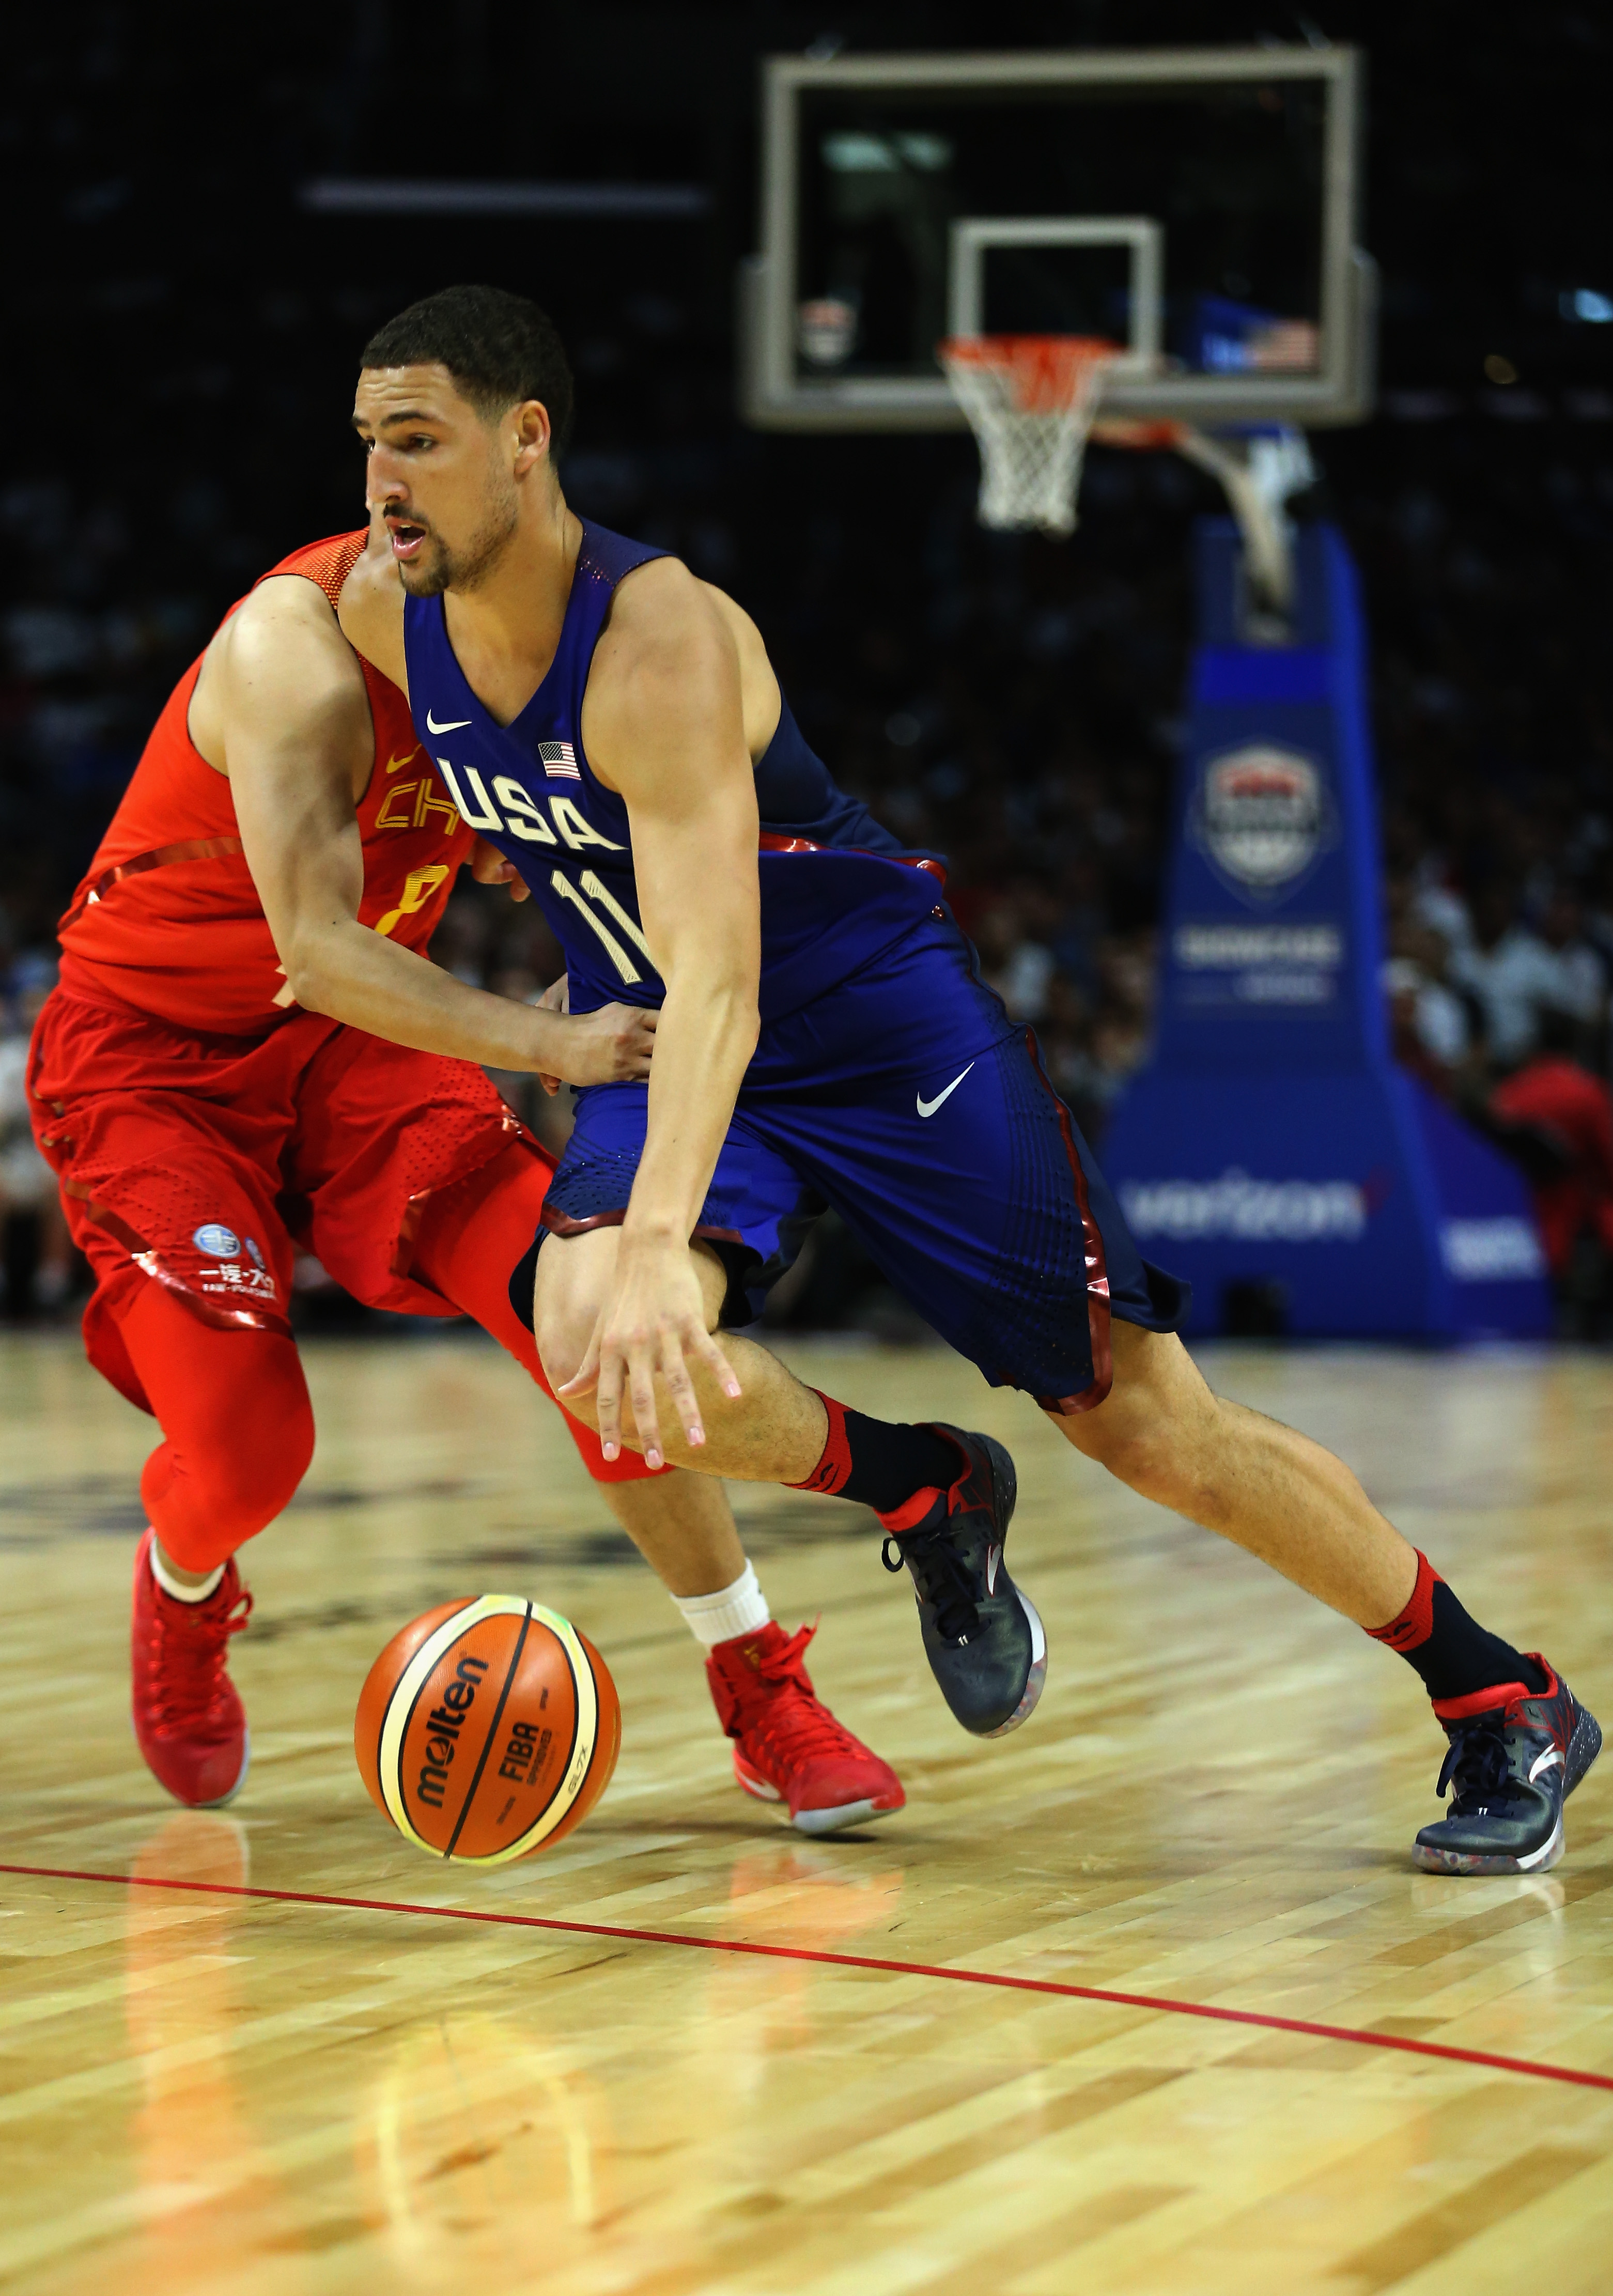 LOS ANGELES, CA - JULY 24: Klay Thompson #11 of the United States drives to the basket against Ding Yanyuhang #8 of China during the second half of a USA Basketball showcase exhibition game at Staples Center on July 24, 2016 in Los Angeles, California.   Sean M. Haffey/Getty Images/AFP